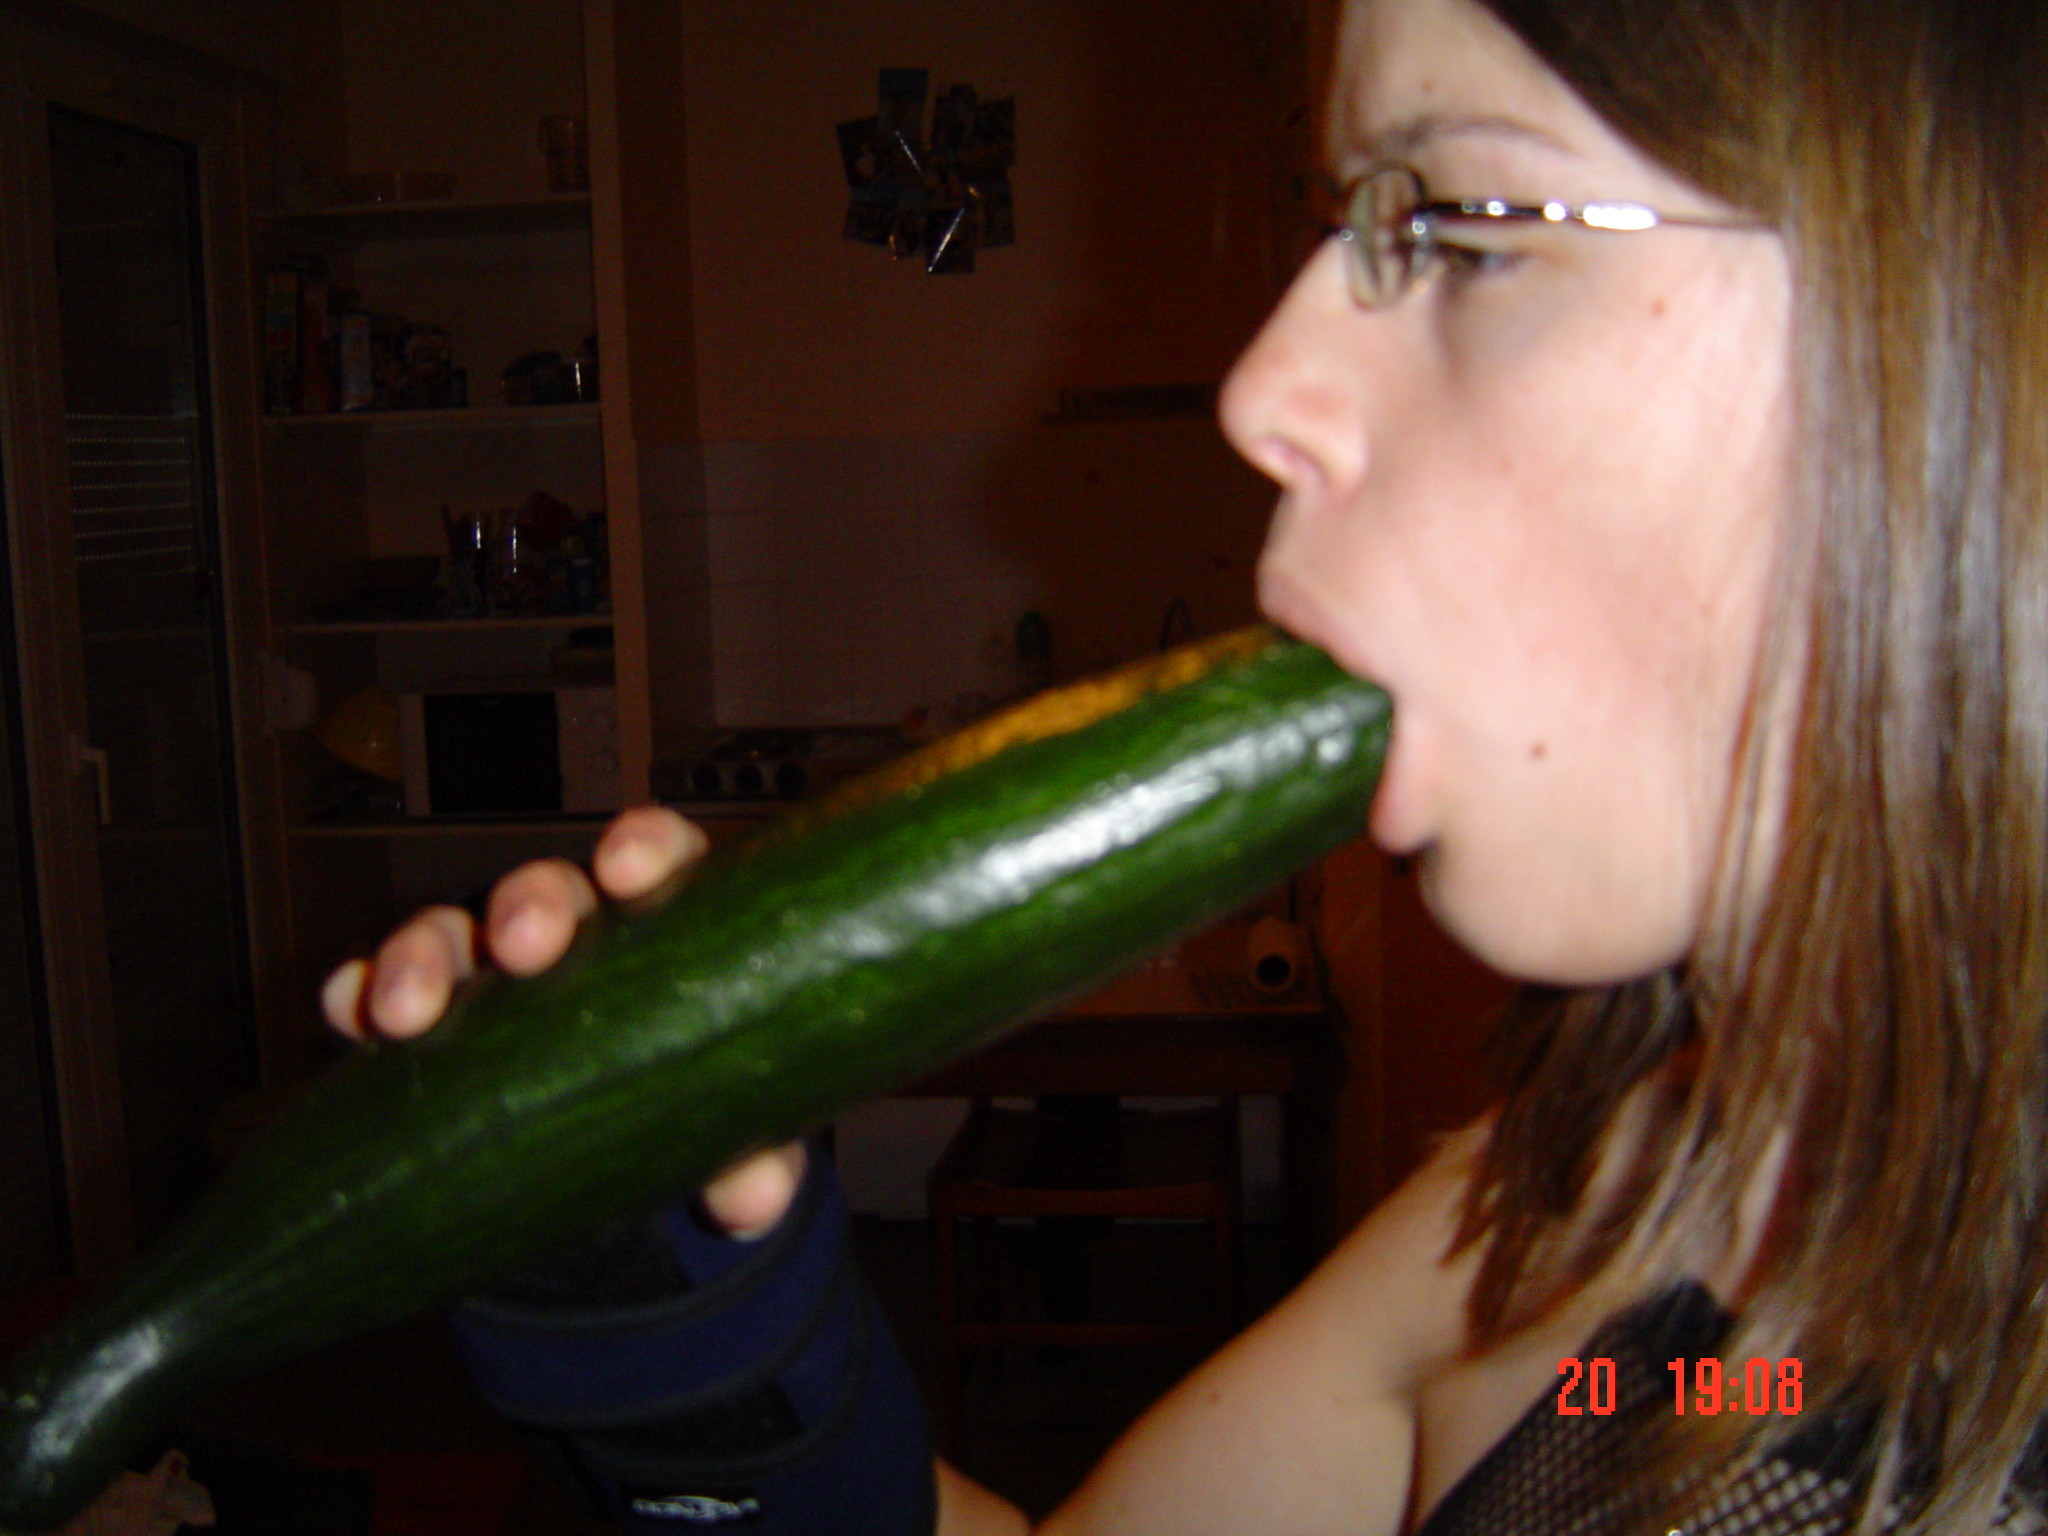 Girl and cucumber.